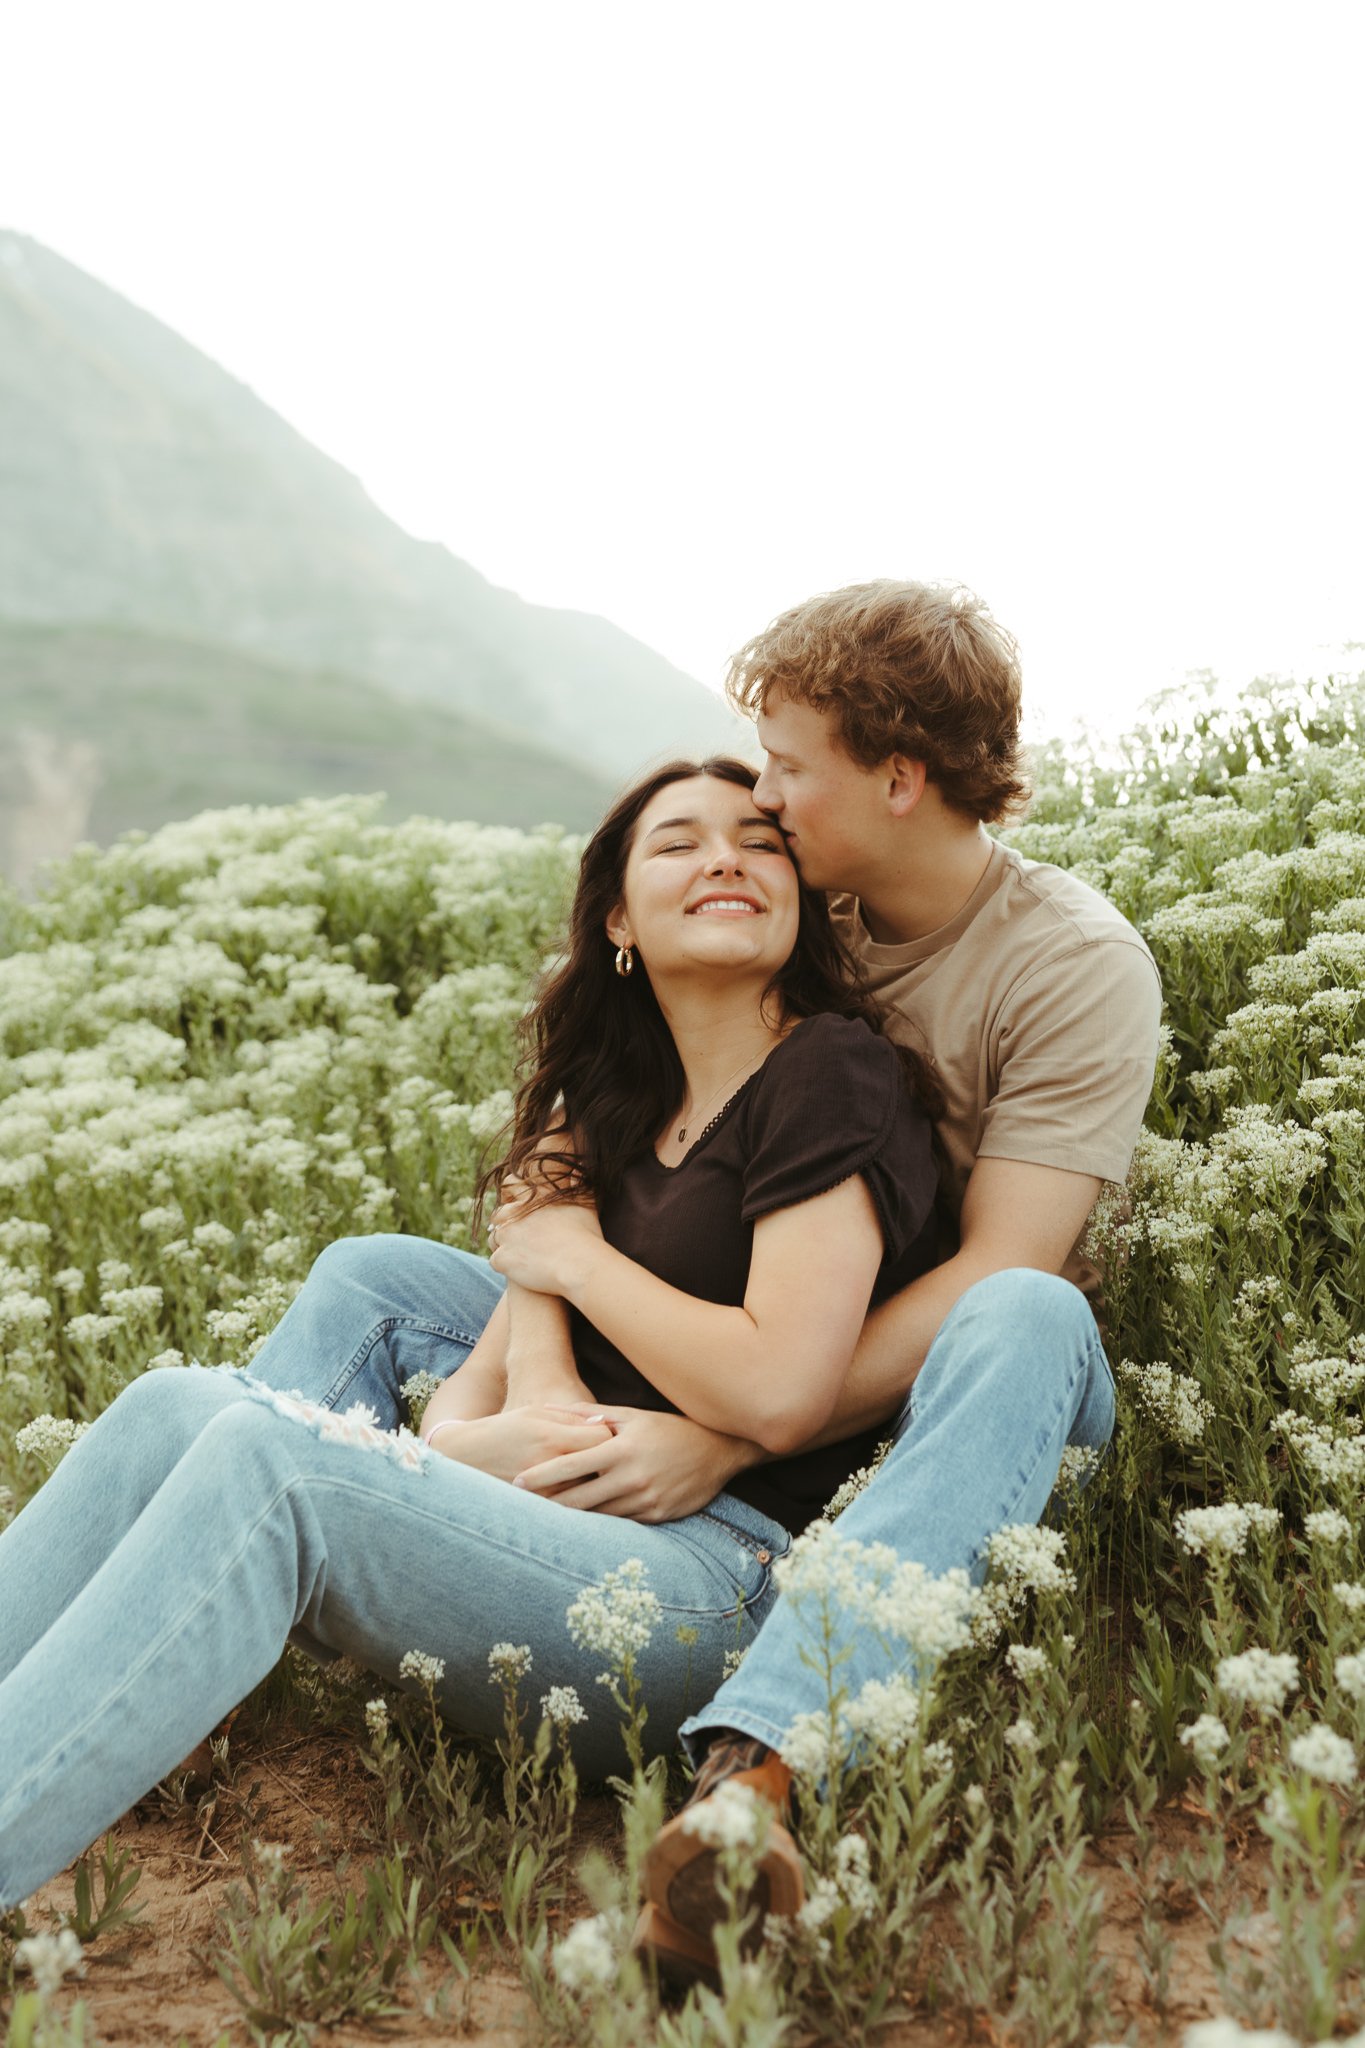 Spring-Provo-Canyon-Wildflowers-Engagement-Session-15